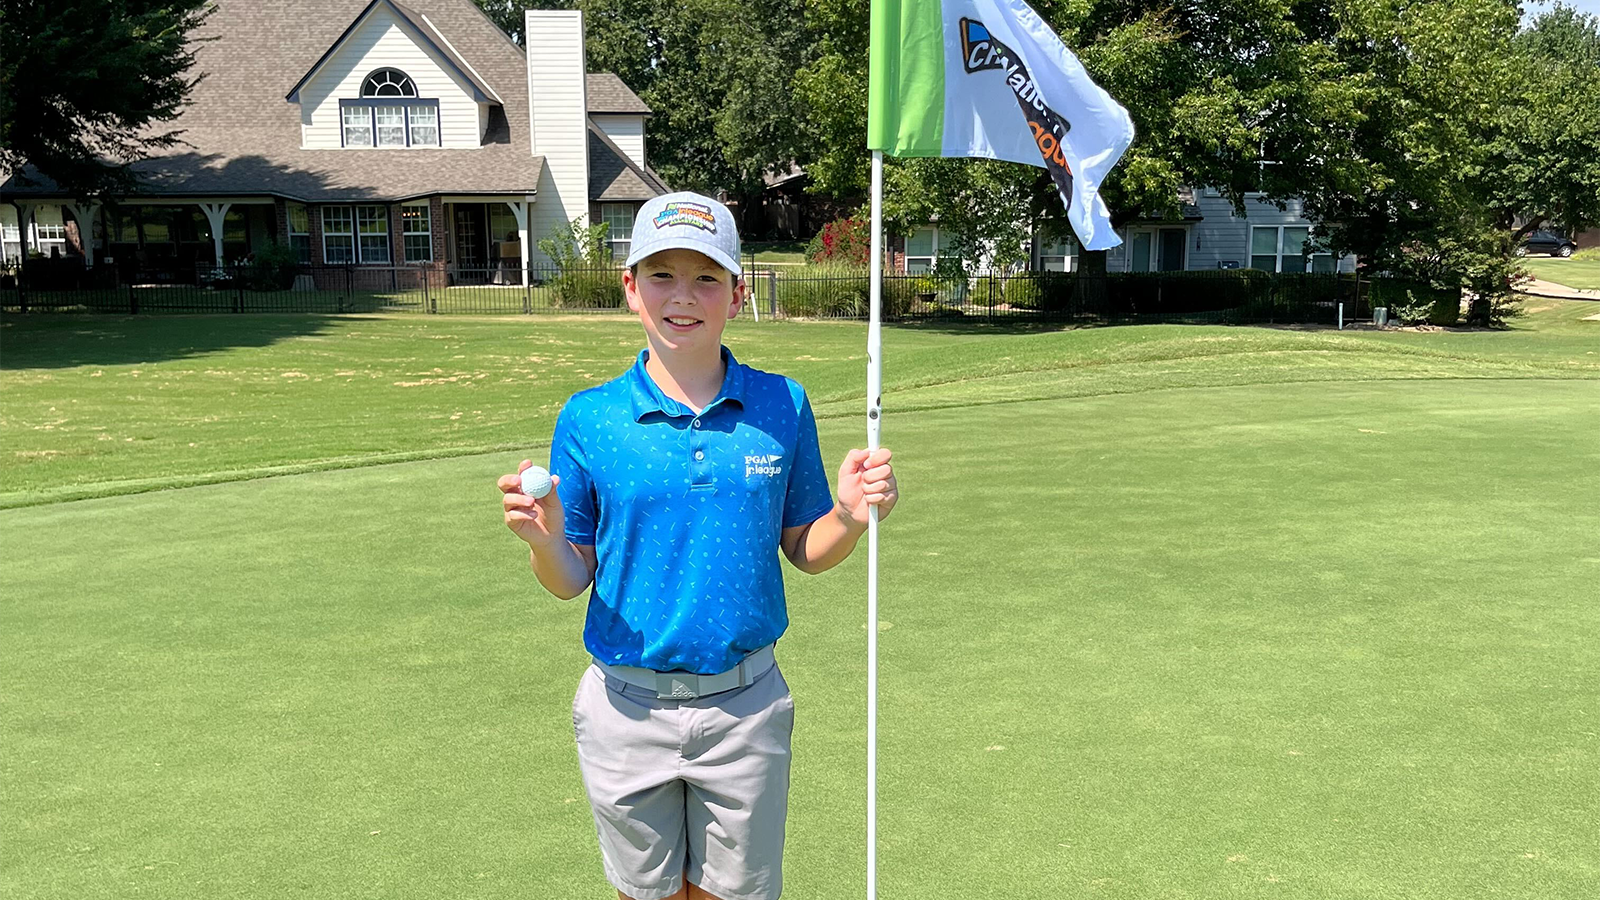 Ainslie Stanford from Battle Creek holed out for eagle on #9 at the PGA Jr. League Regional at The Club at Indian Springs. 